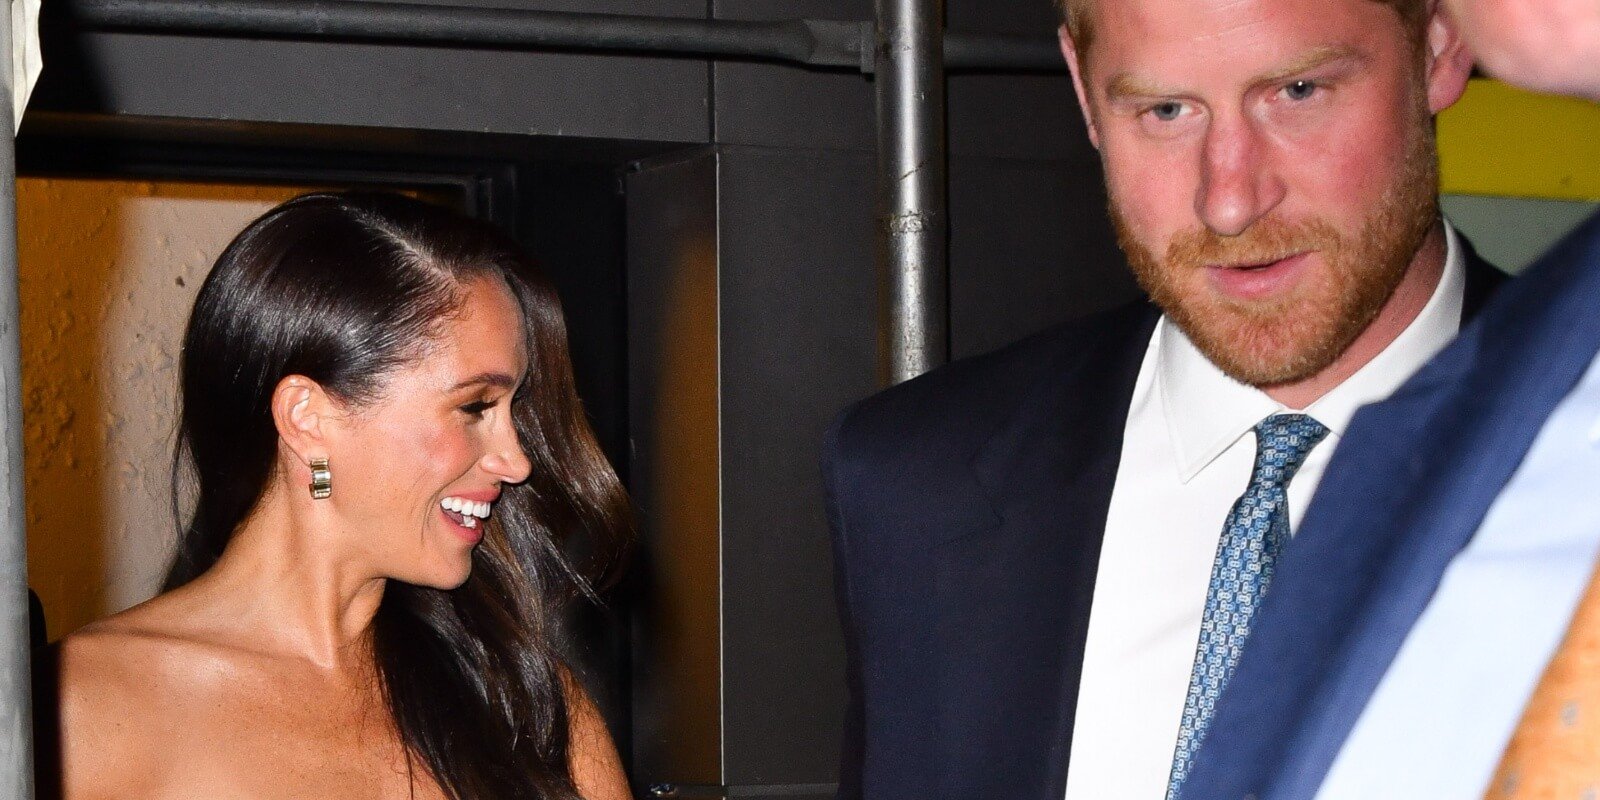 Meghan Markle and Prince Harry exit an awards gala in New York City on May 16, 2023.